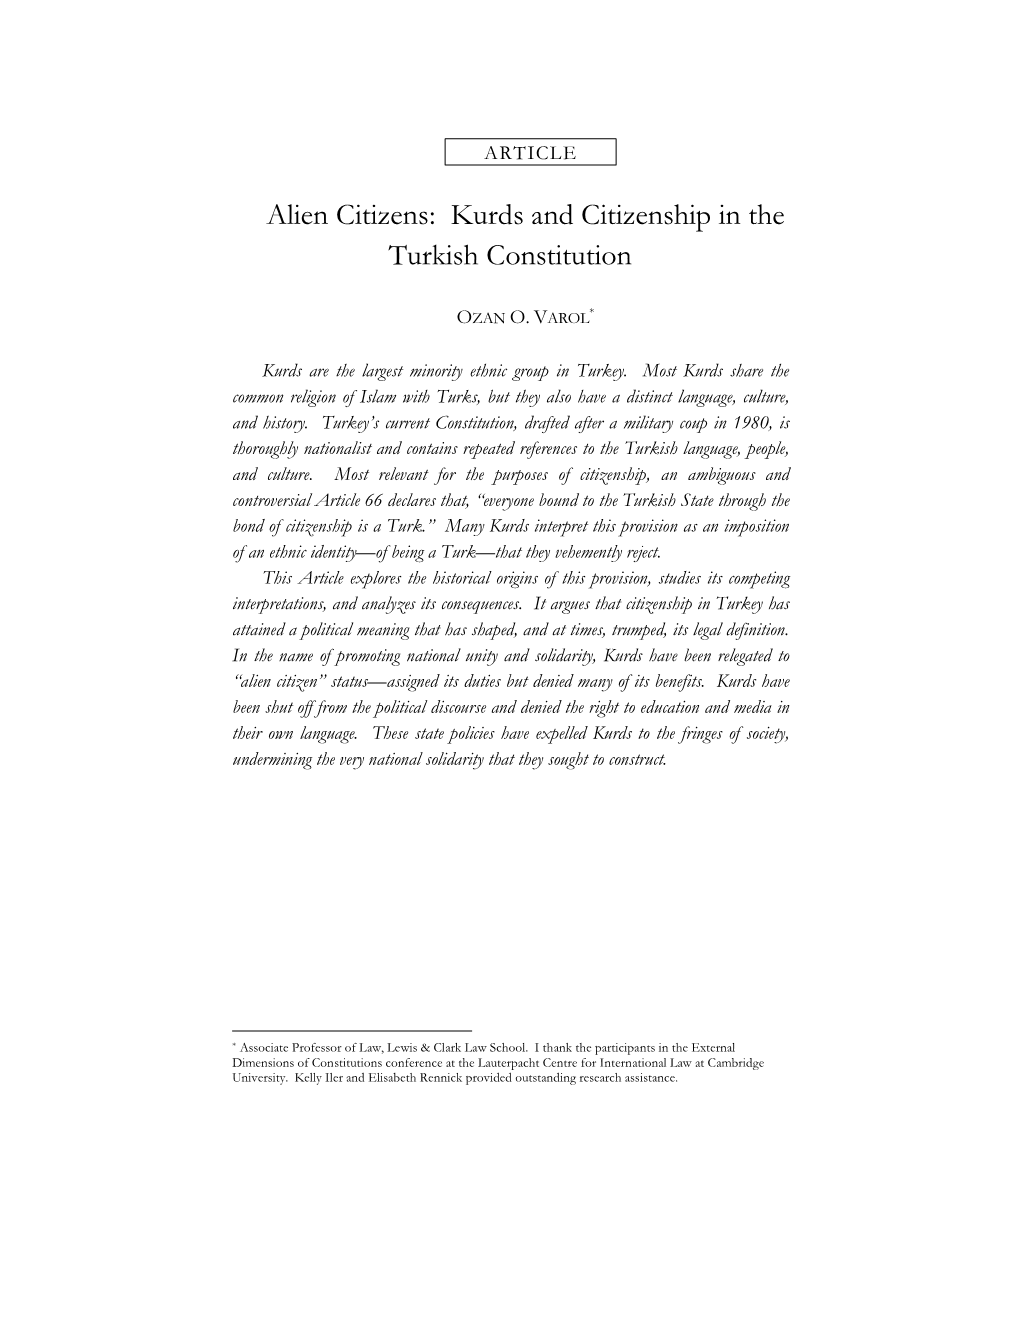 Kurds and Citizenship in the Turkish Constitution